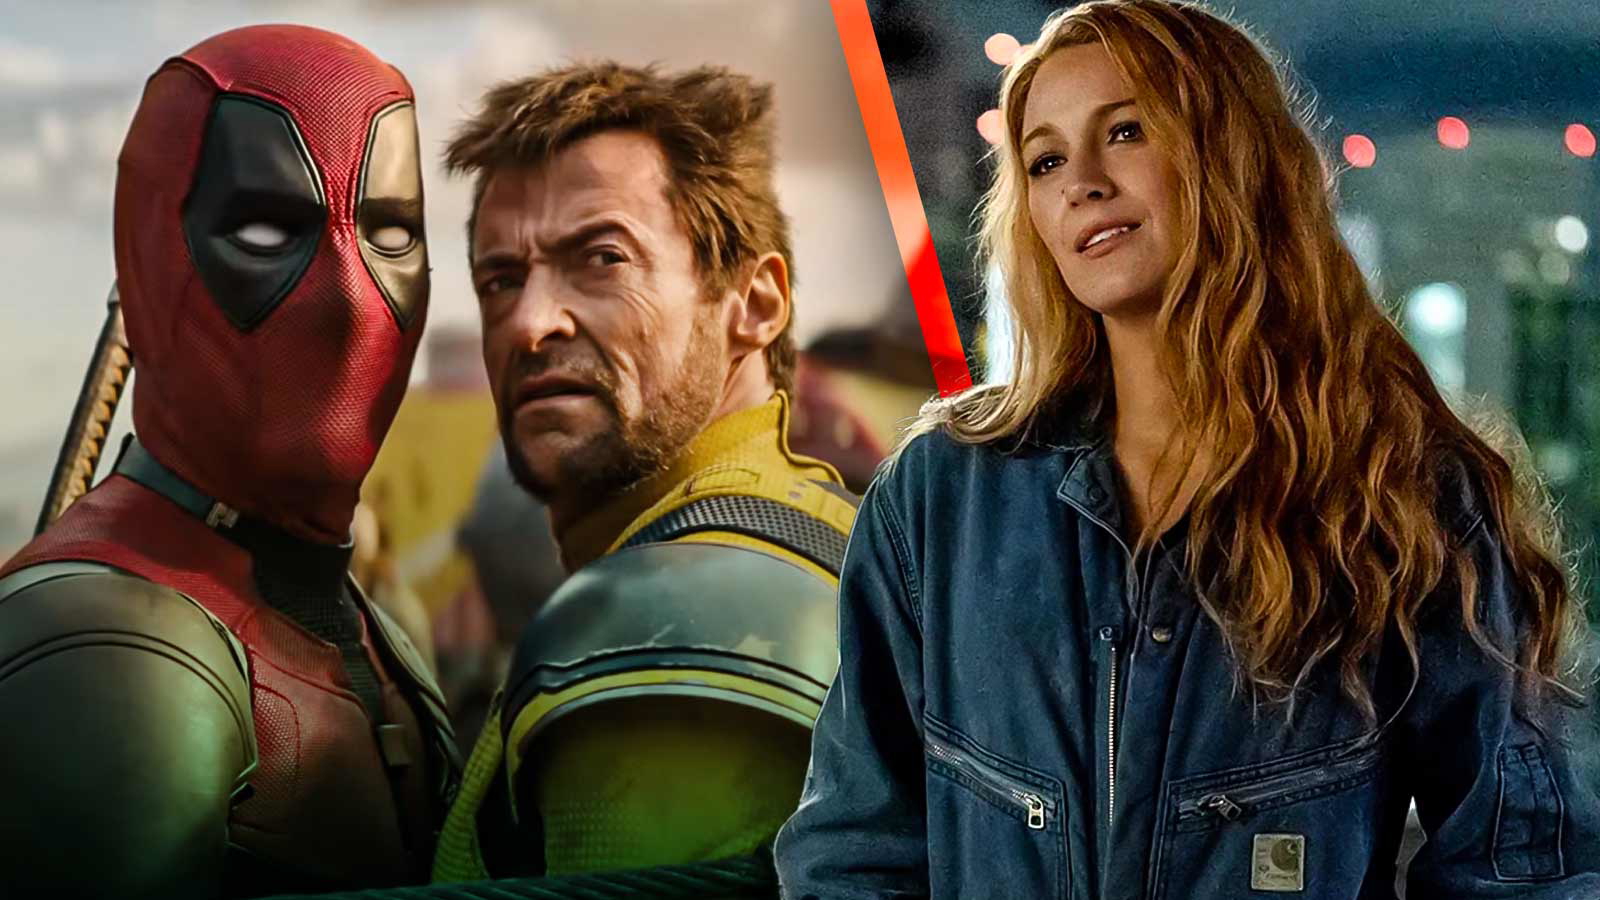 it ends with us, blake lively, deadpool and wolverine